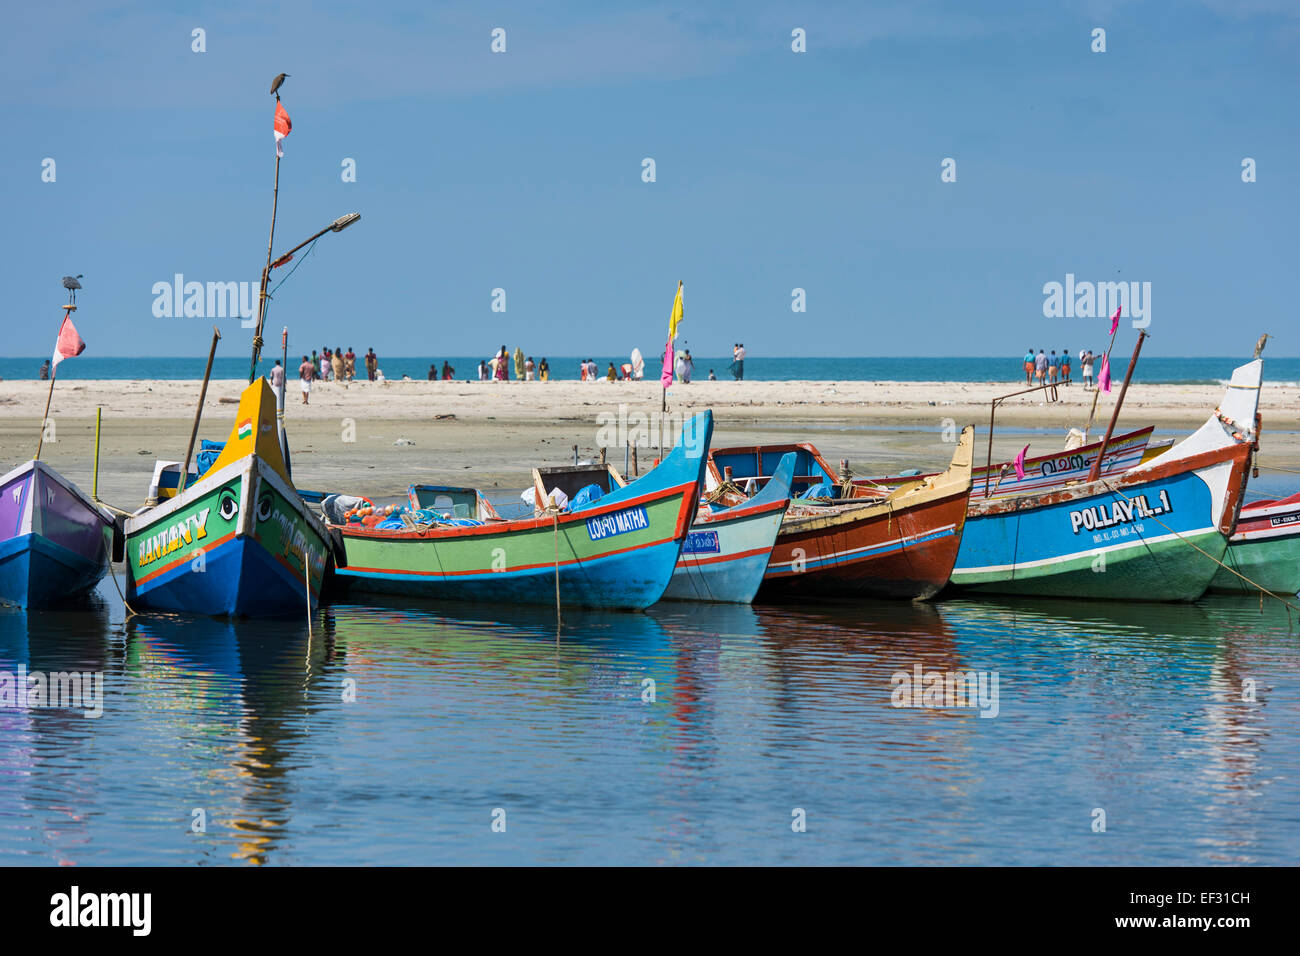 Brightly painted fishing boats and people on the beach, near Alappuzha, Kerala, India Stock Photo